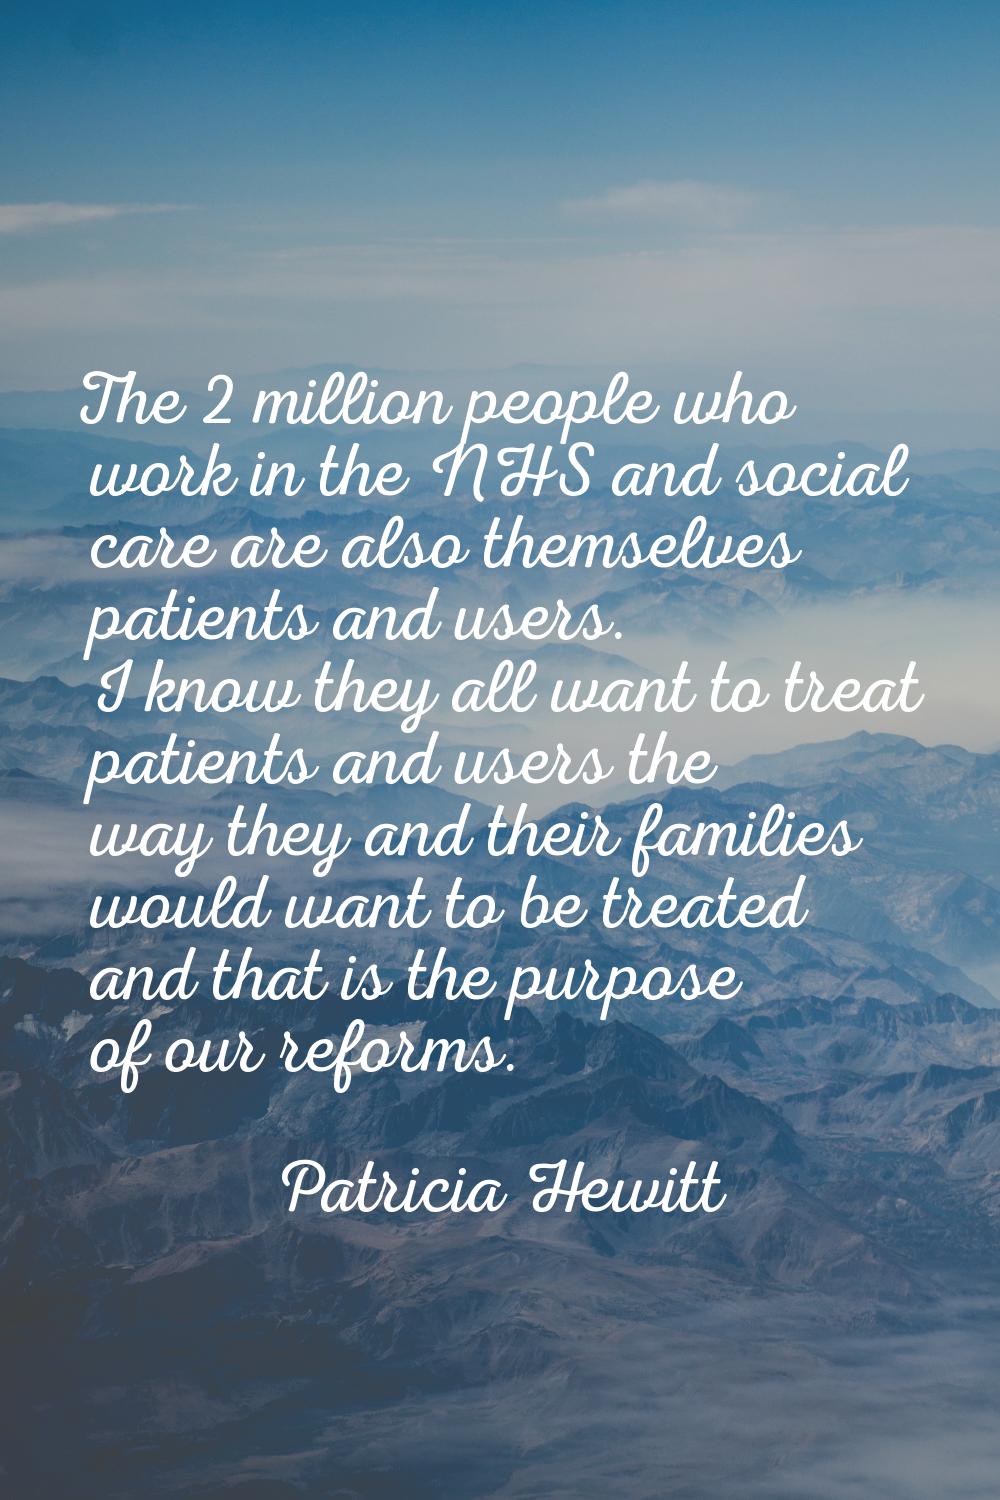 The 2 million people who work in the NHS and social care are also themselves patients and users. I 